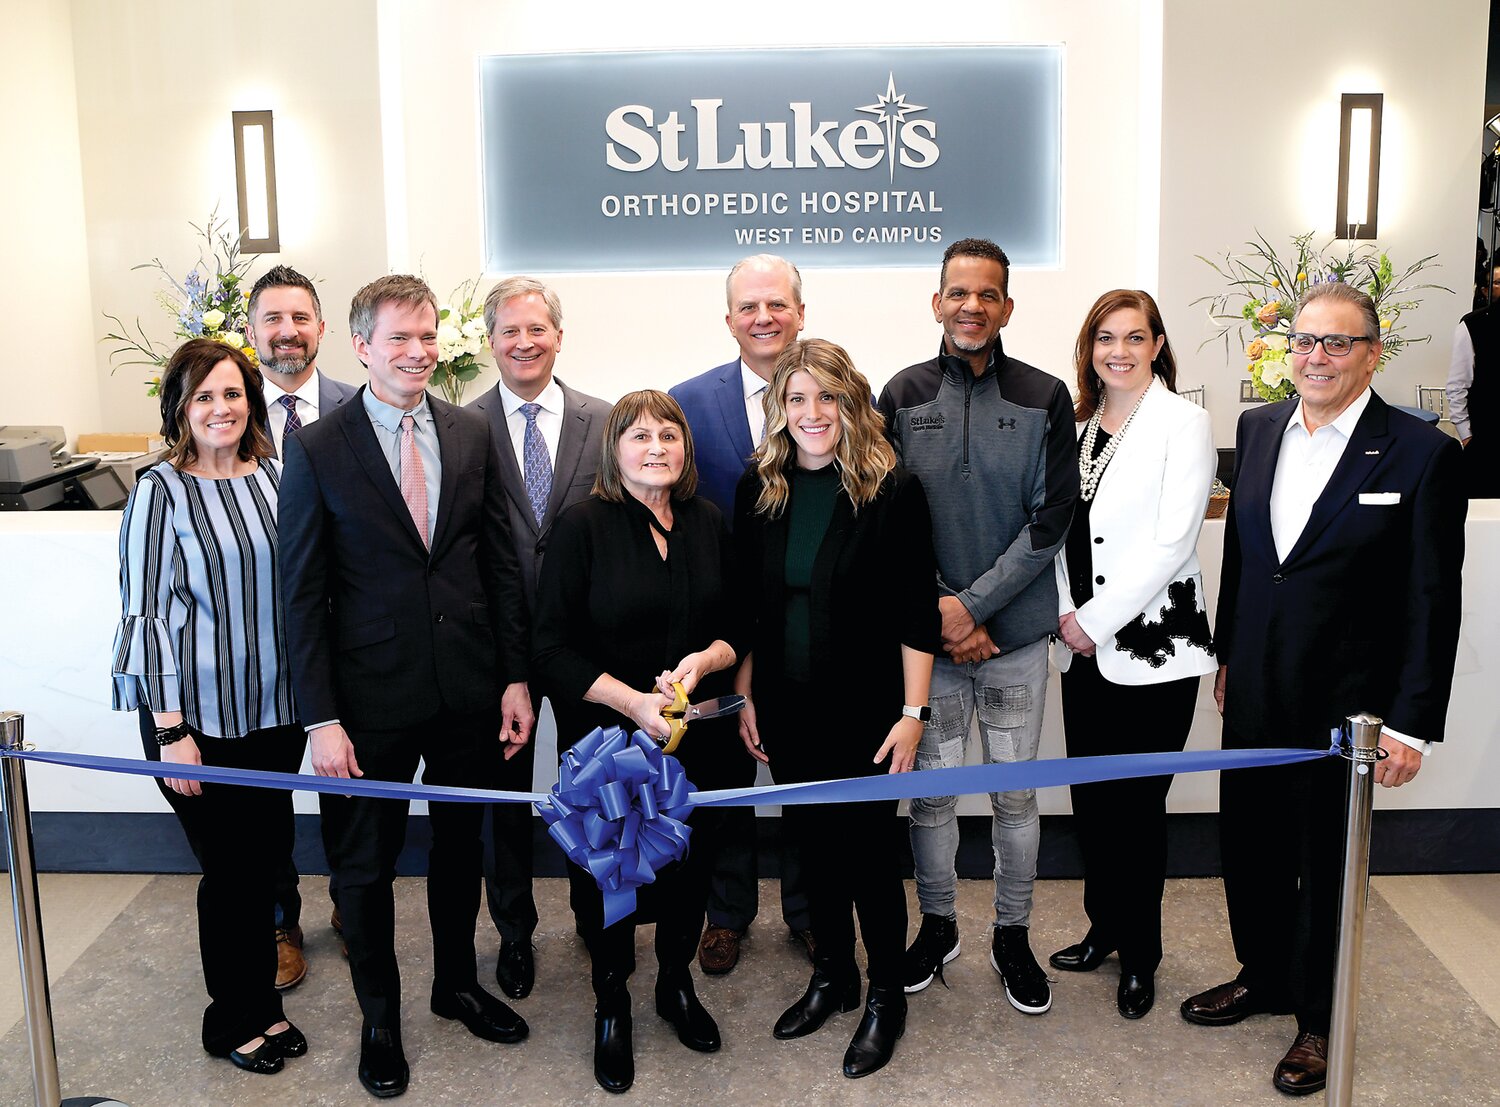 At the ribbon cutting for St. Luke’s Orthopedic Hospital in Allentown are, from left, Christine Lewbart, director of surgical services; Trevor Micklos, president of Warren Campus; Bill Moyer, West region president; Joel Fagerstrom, chief operating officer; Maryanne Sontak, St. Luke’s orthopedic patient; Dr. Douglas Lundy, chairman of orthopedics; Jessica Kamensky, orthopedic service line administrator; Andre Reed, pro football Hall of Famer; Keri Angelozzi, vice president of patient care; and Richard A. Anderson, president & CEO.